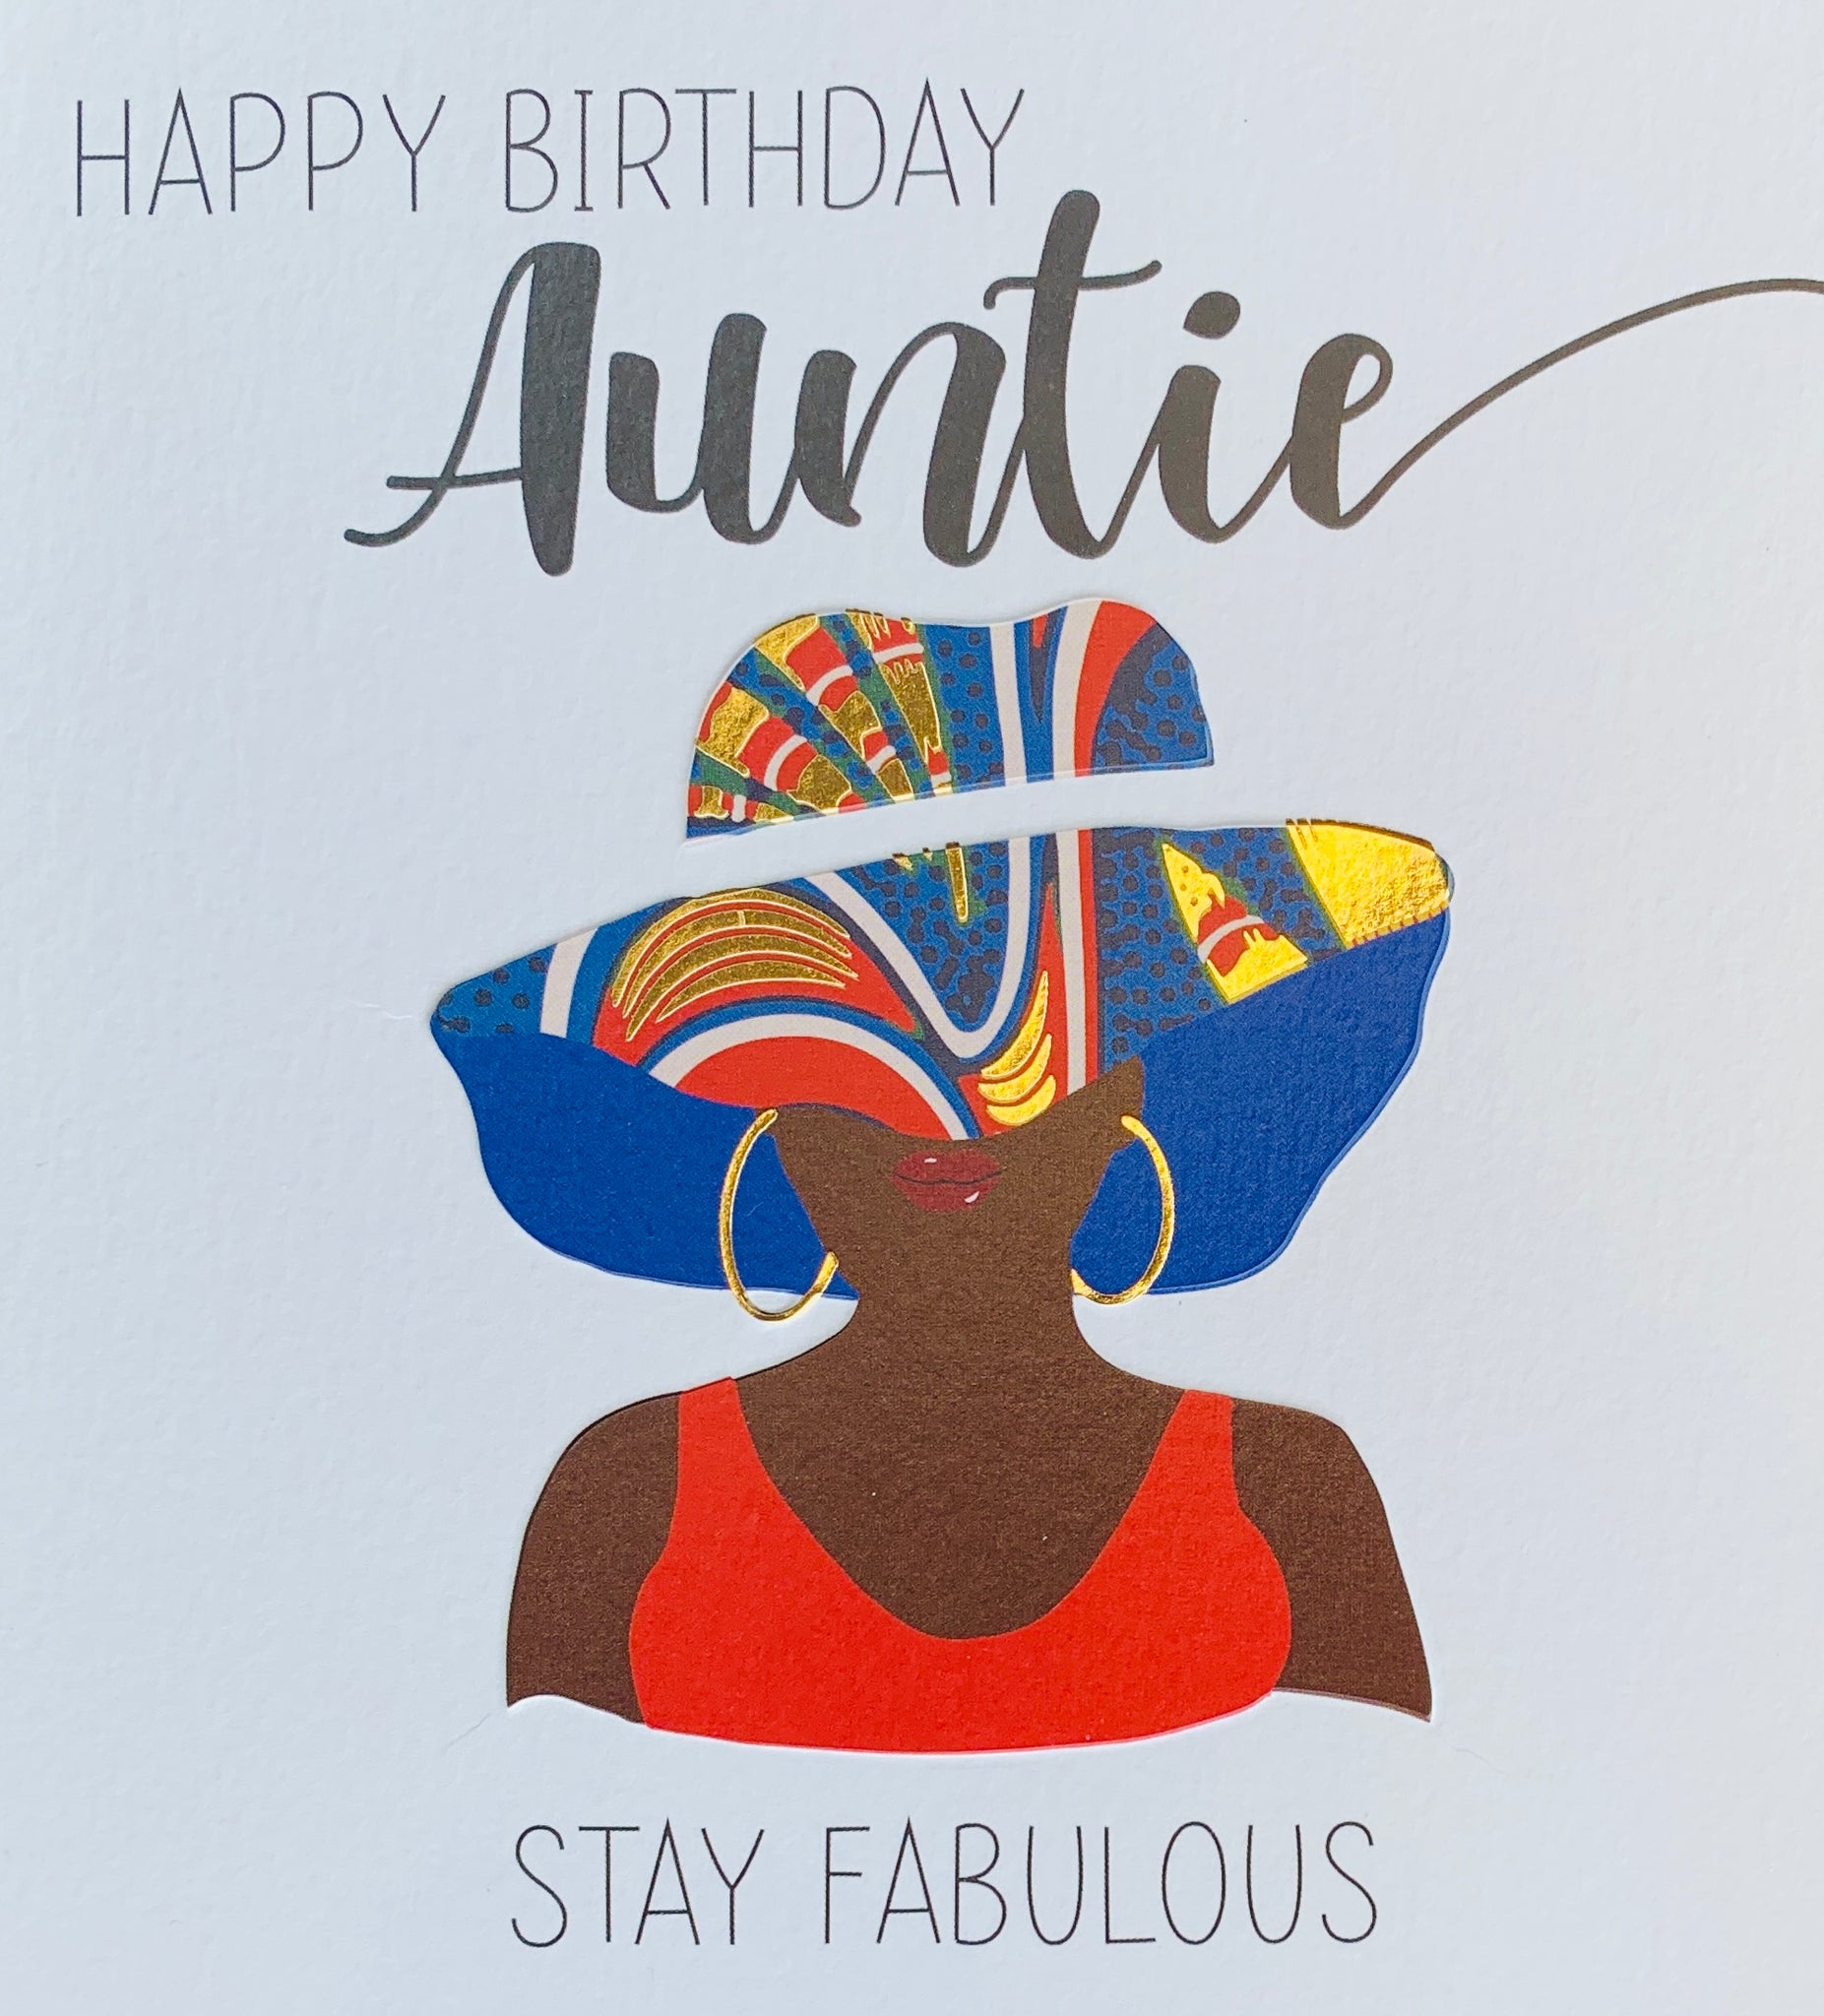 Auntie birthday card - Afro Touch